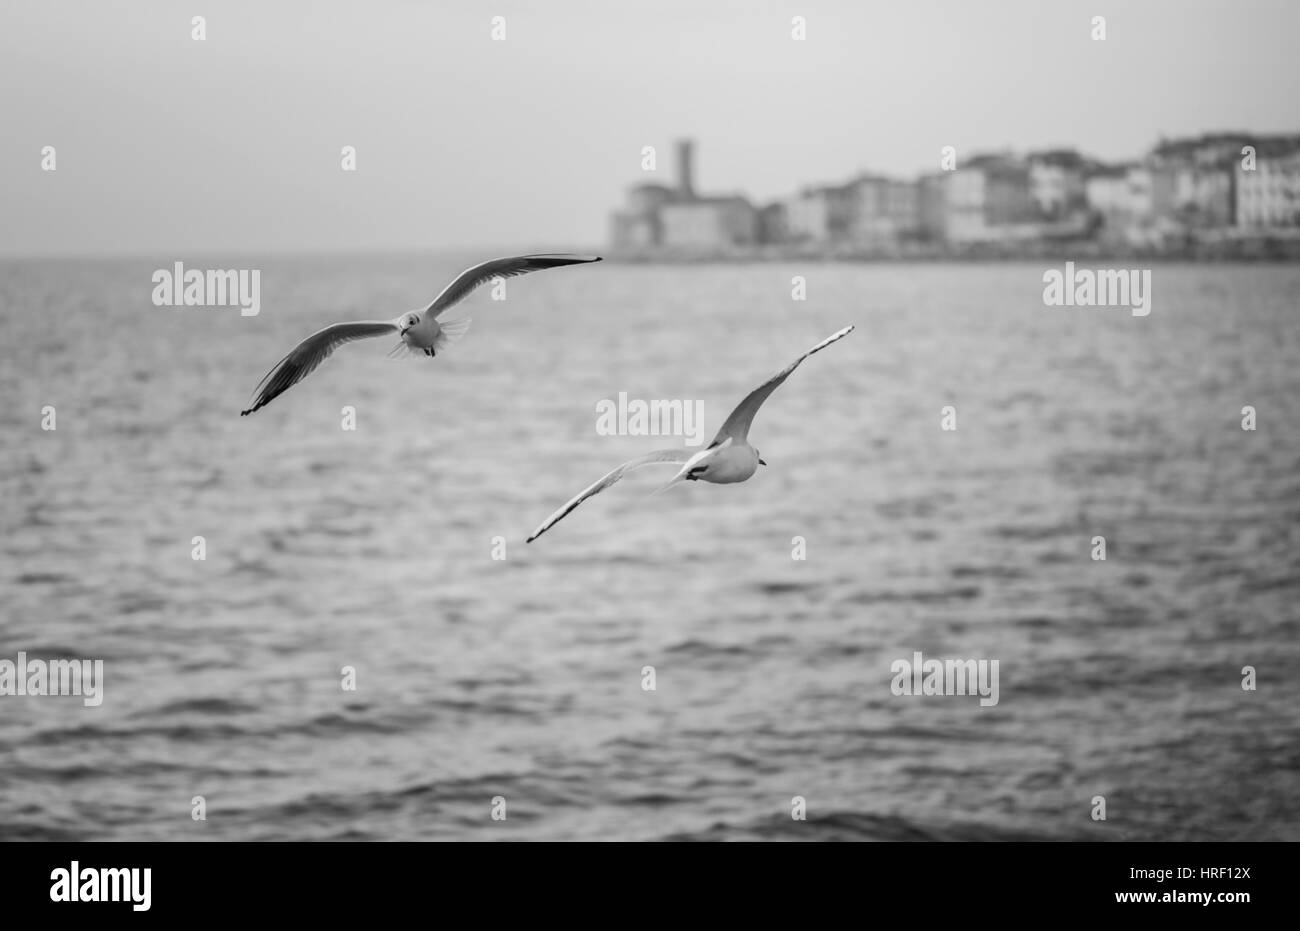 Seagulls are flying above sea level over the mediterranean sea. Stock Photo